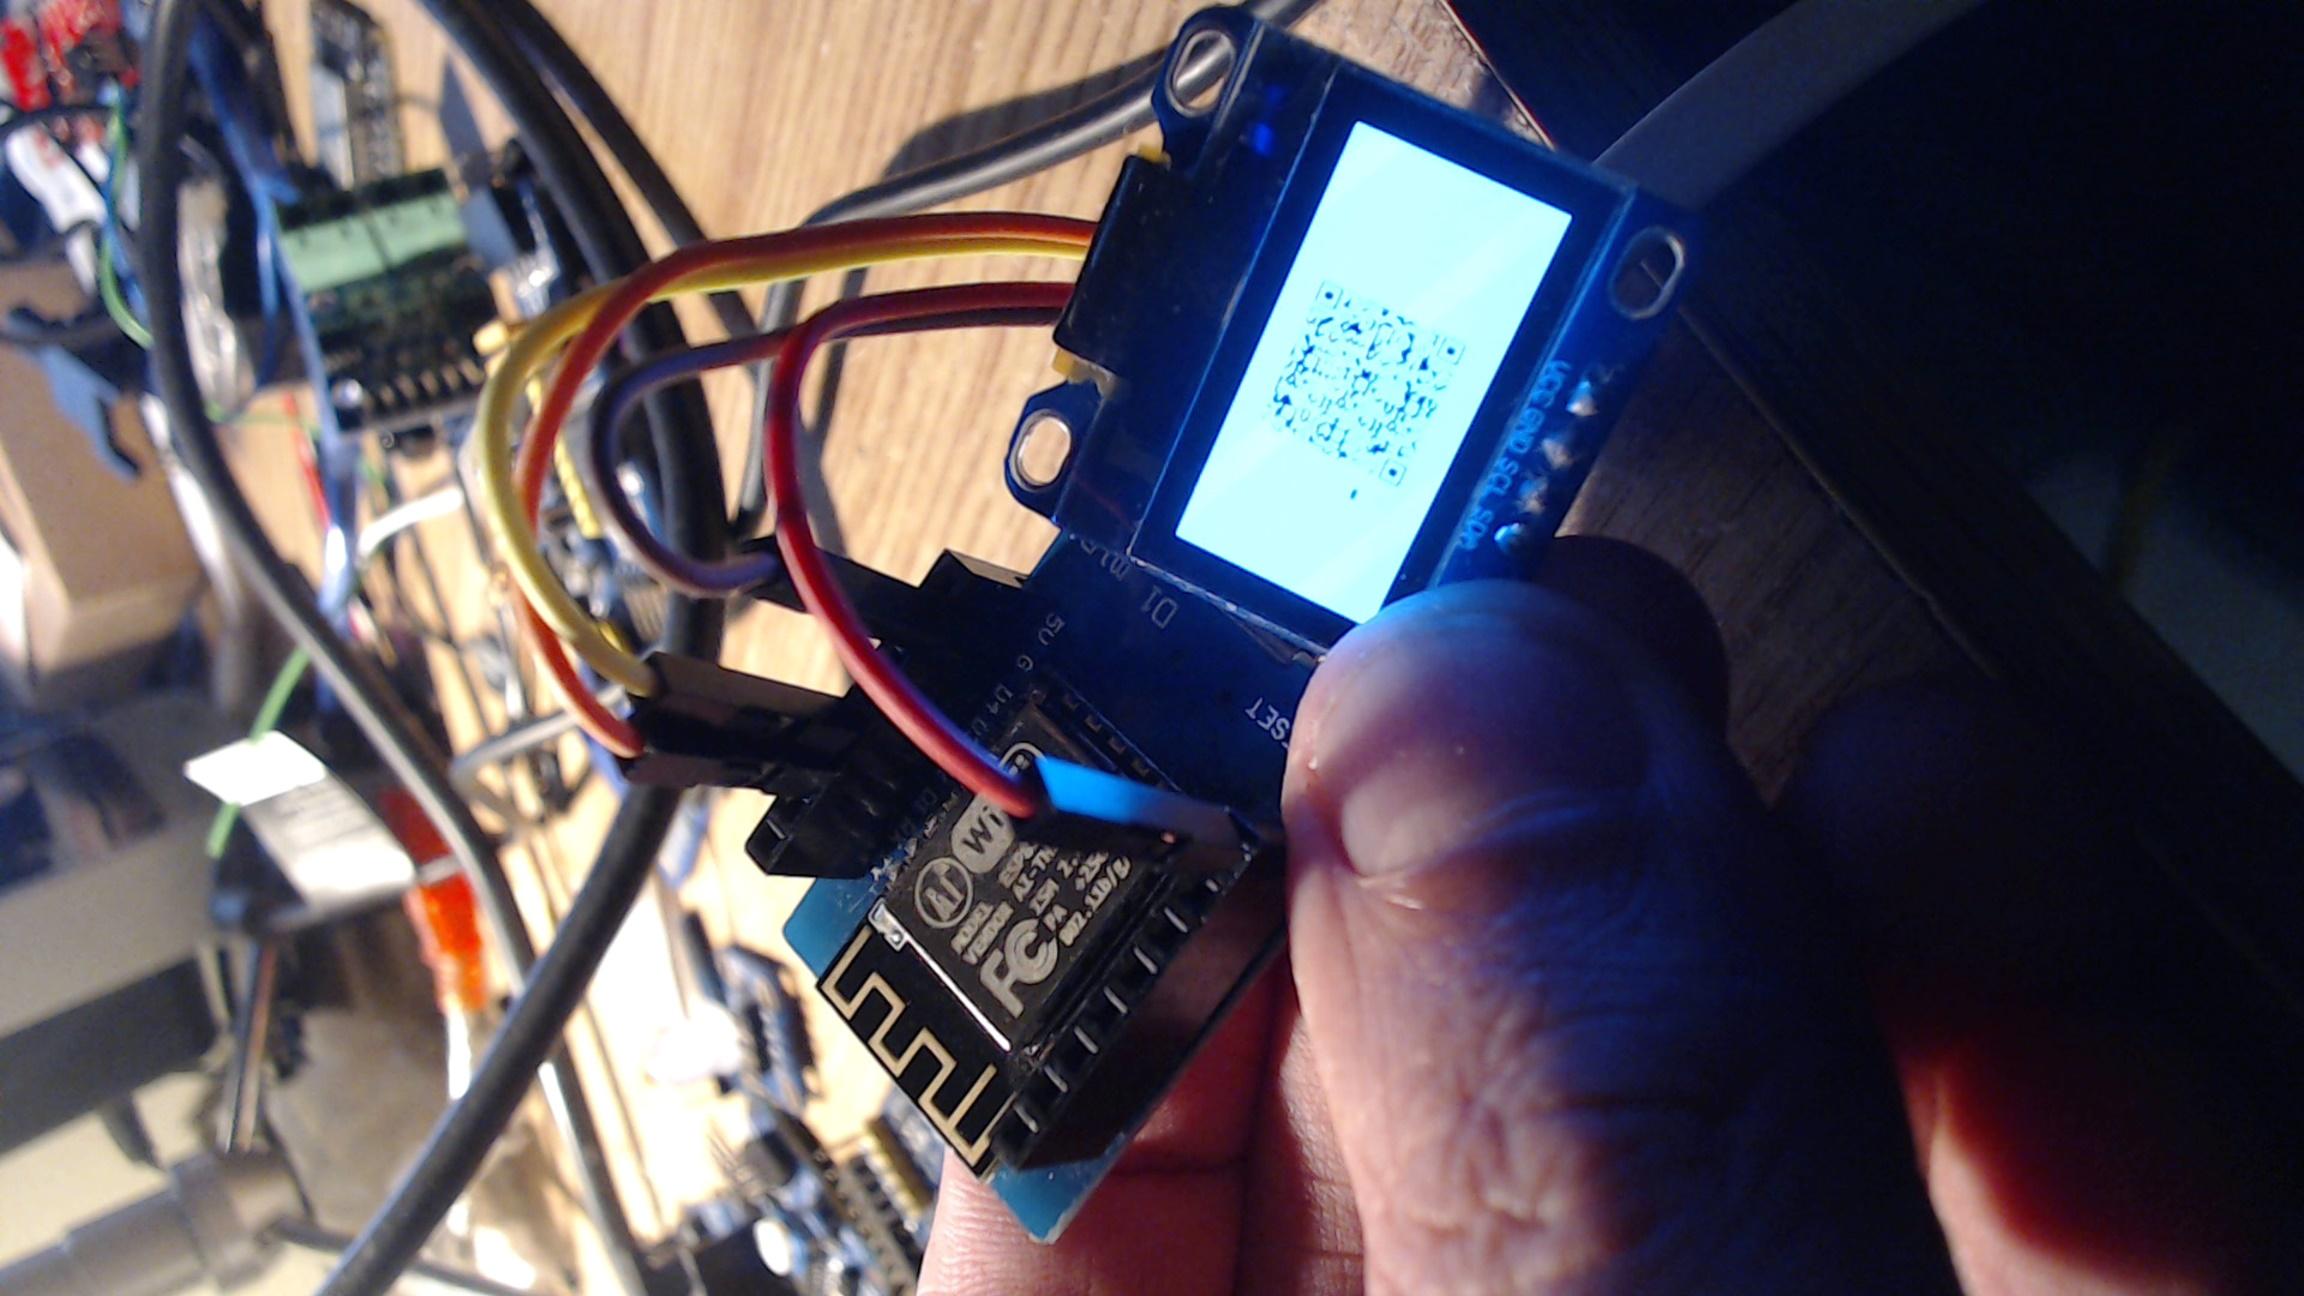 esp8266 and oled displaying QR code